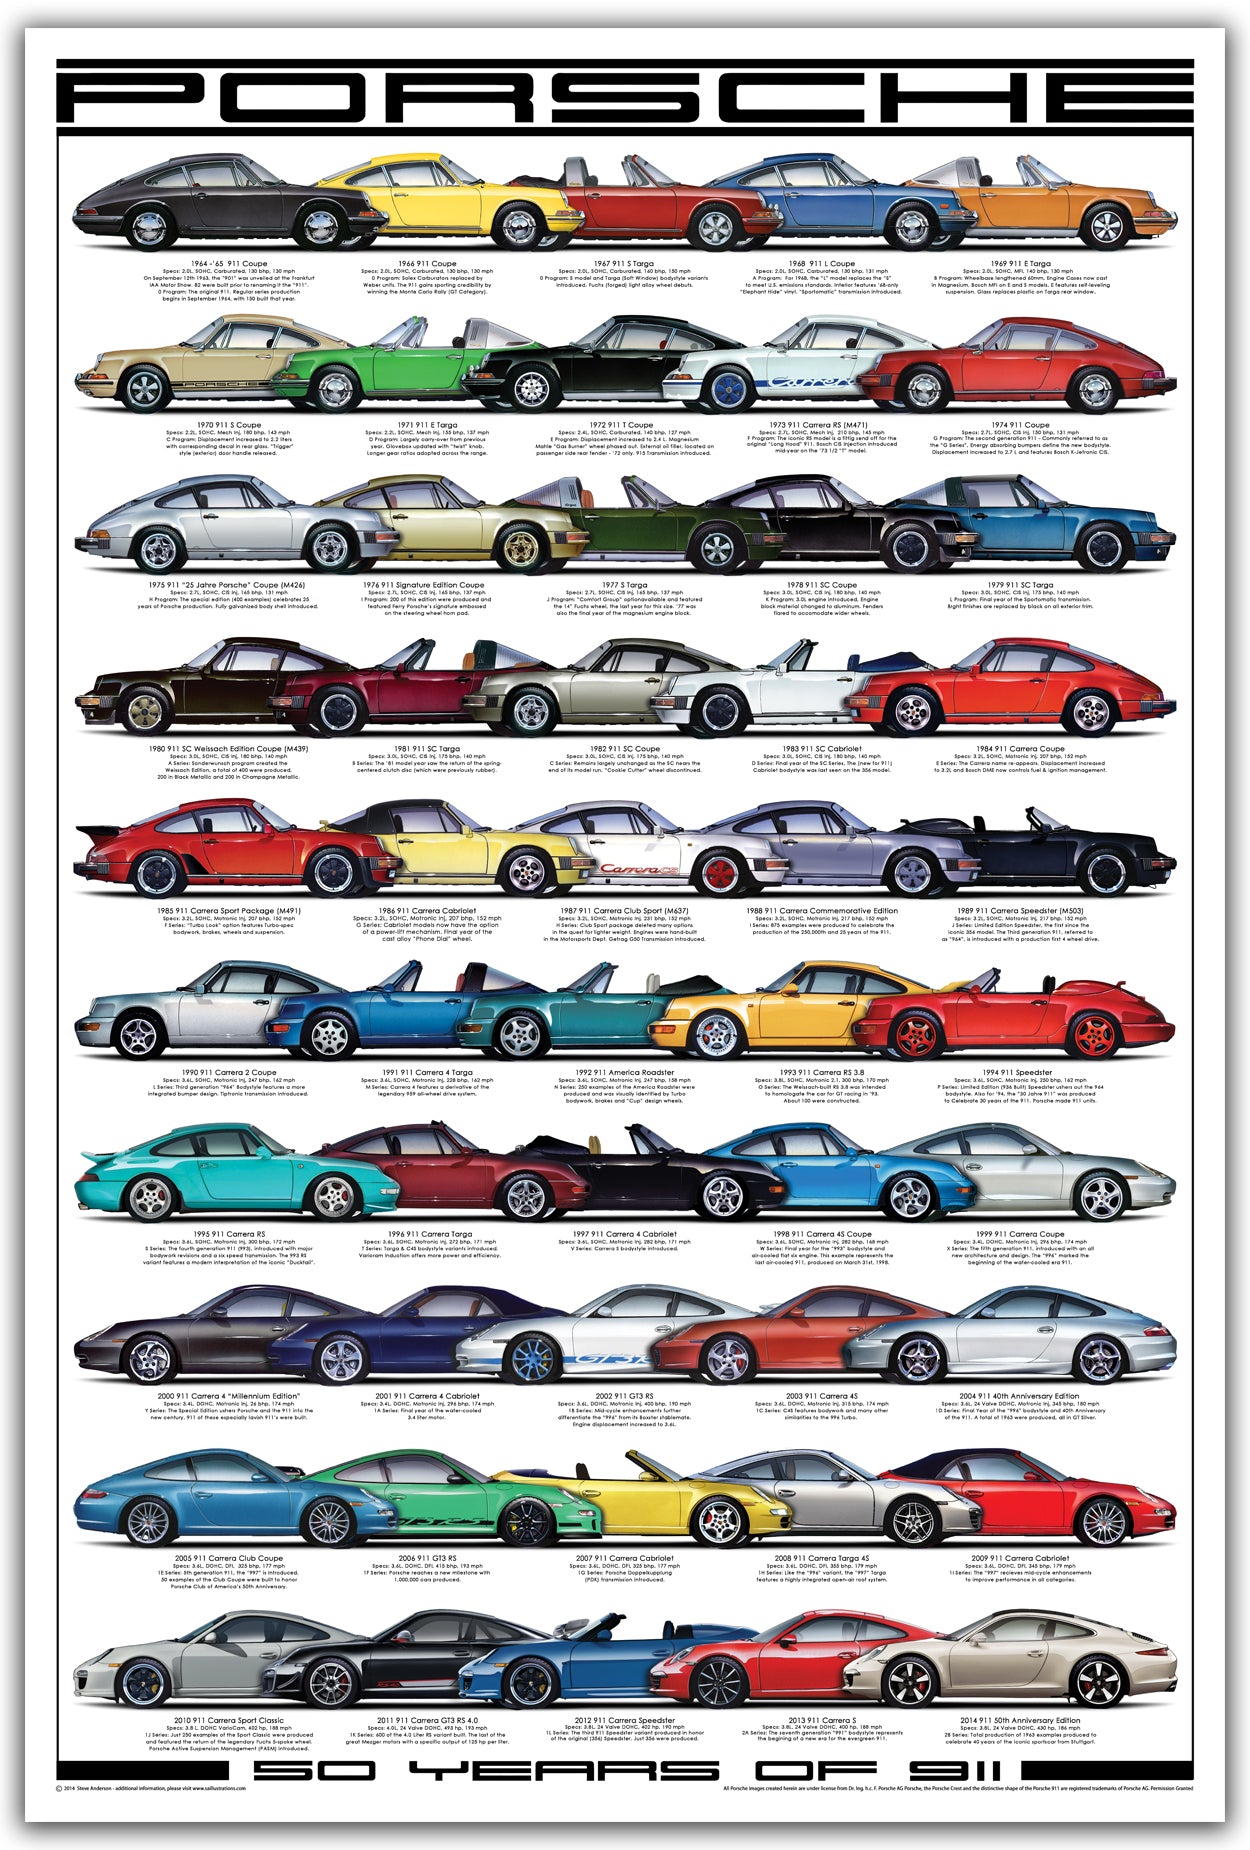 50 Years of 911 (limited edition print)